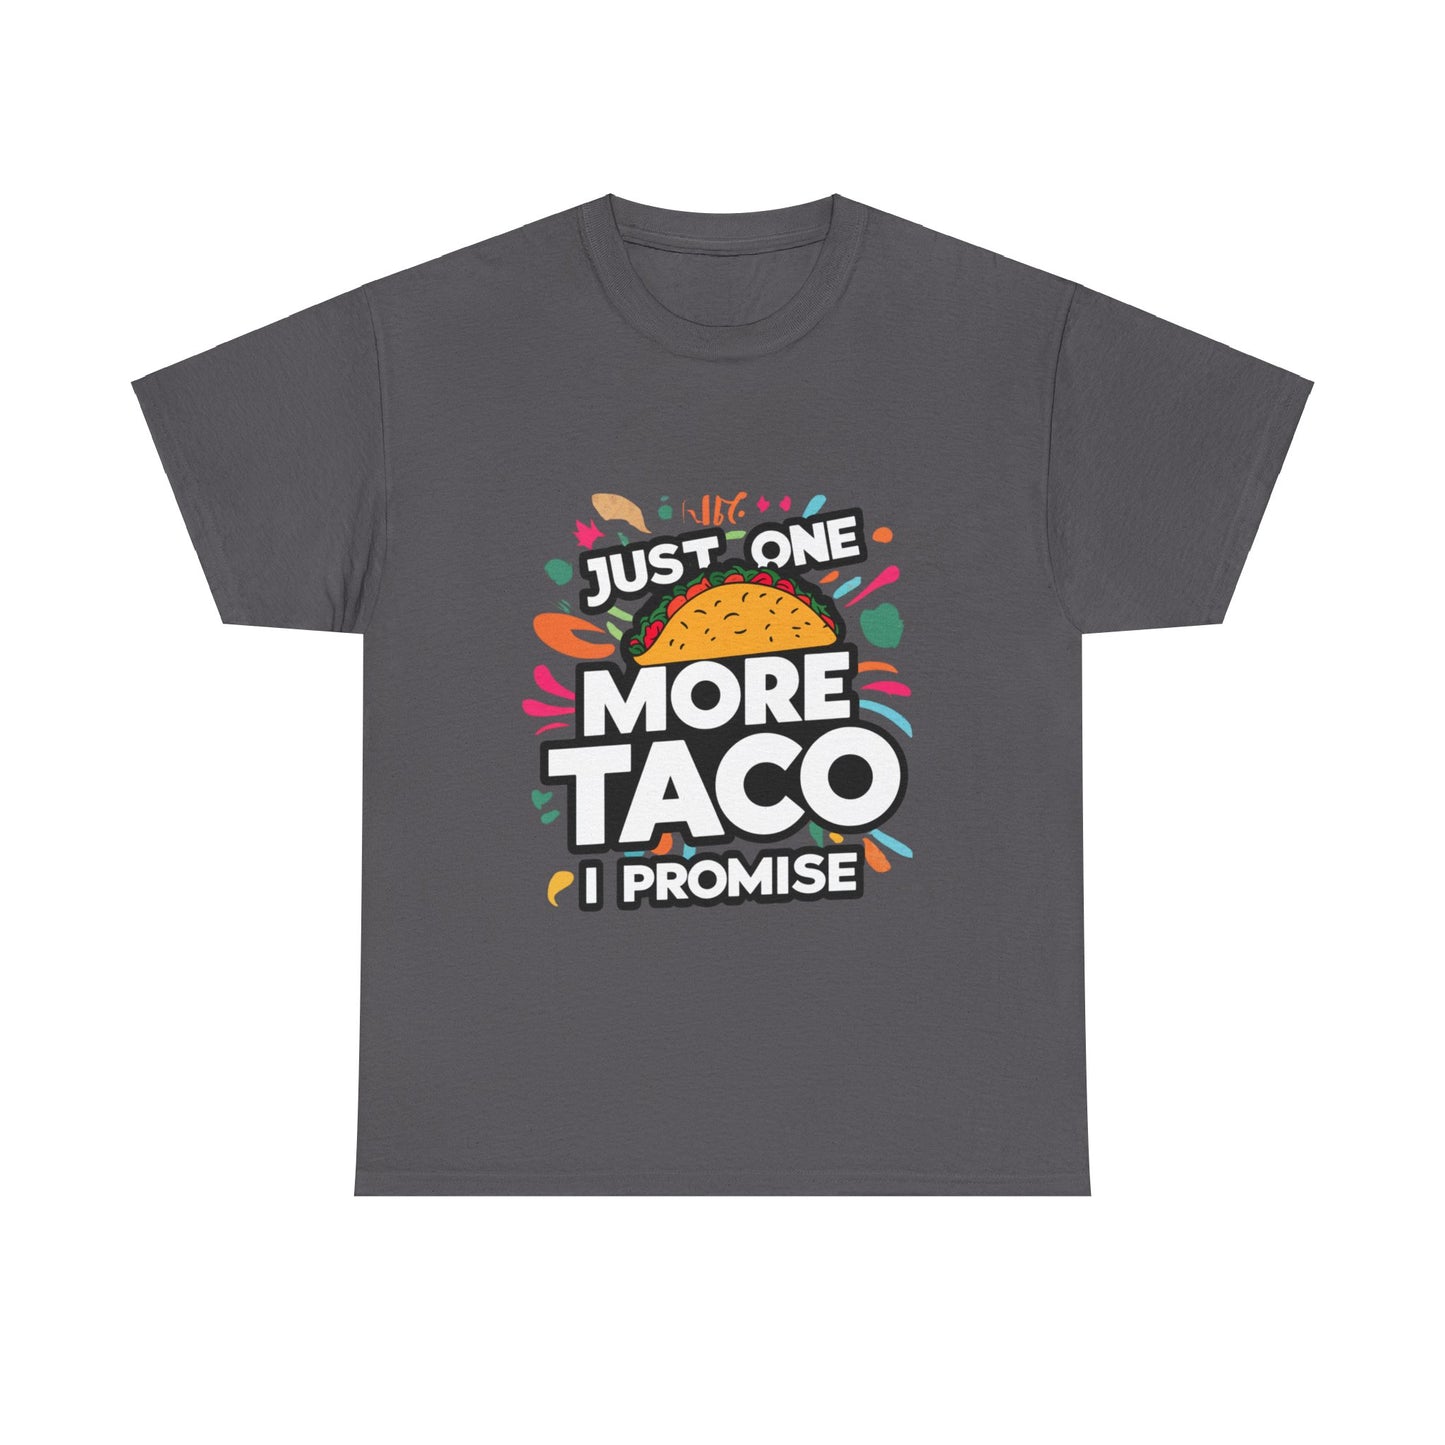 Just One More Taco I Promise Mexican Food Graphic Unisex Heavy Cotton Tee Cotton Funny Humorous Graphic Soft Premium Unisex Men Women Charcoal T-shirt Birthday Gift-2